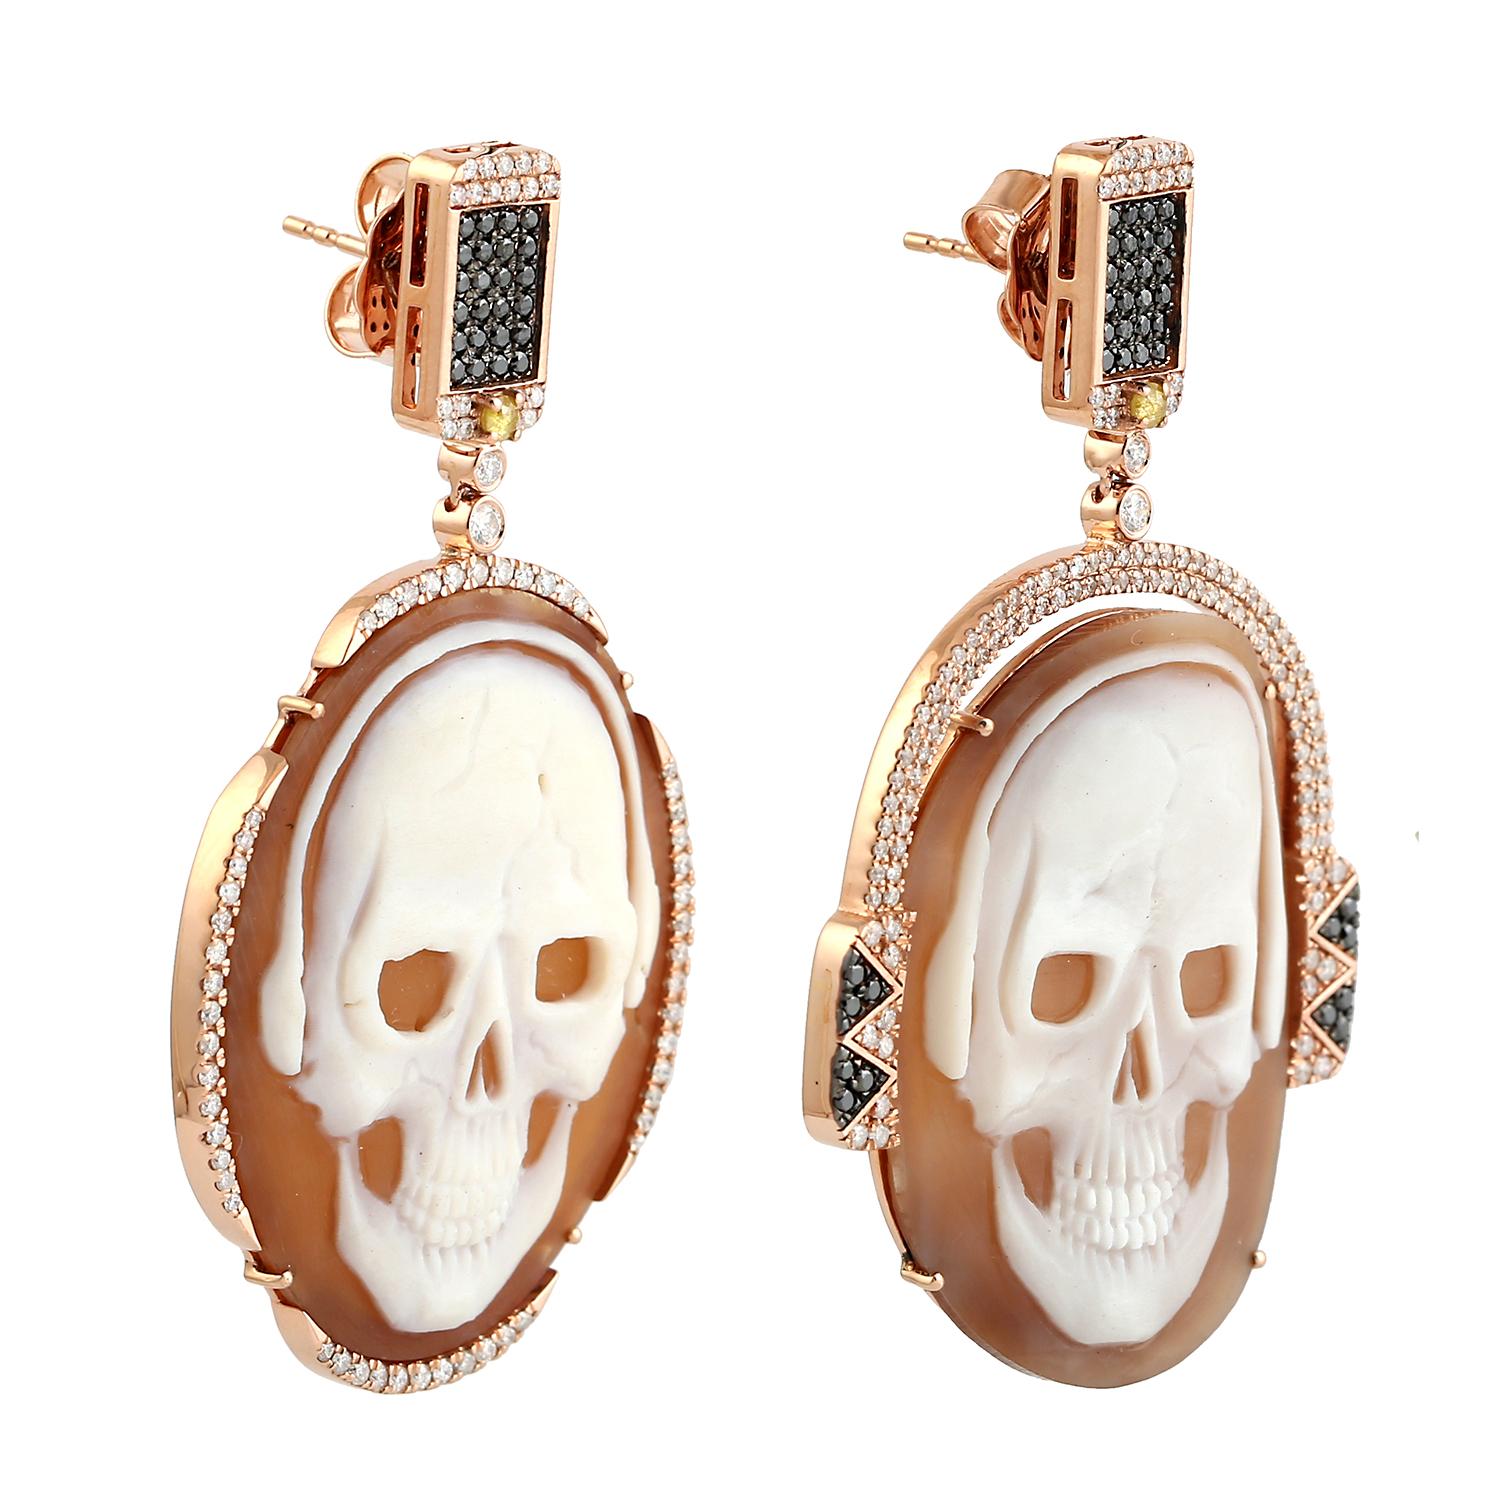 Mixed Cut Carved Skull Sardonyx Earrings With Diamonds Made In 18k Rose Gold For Sale